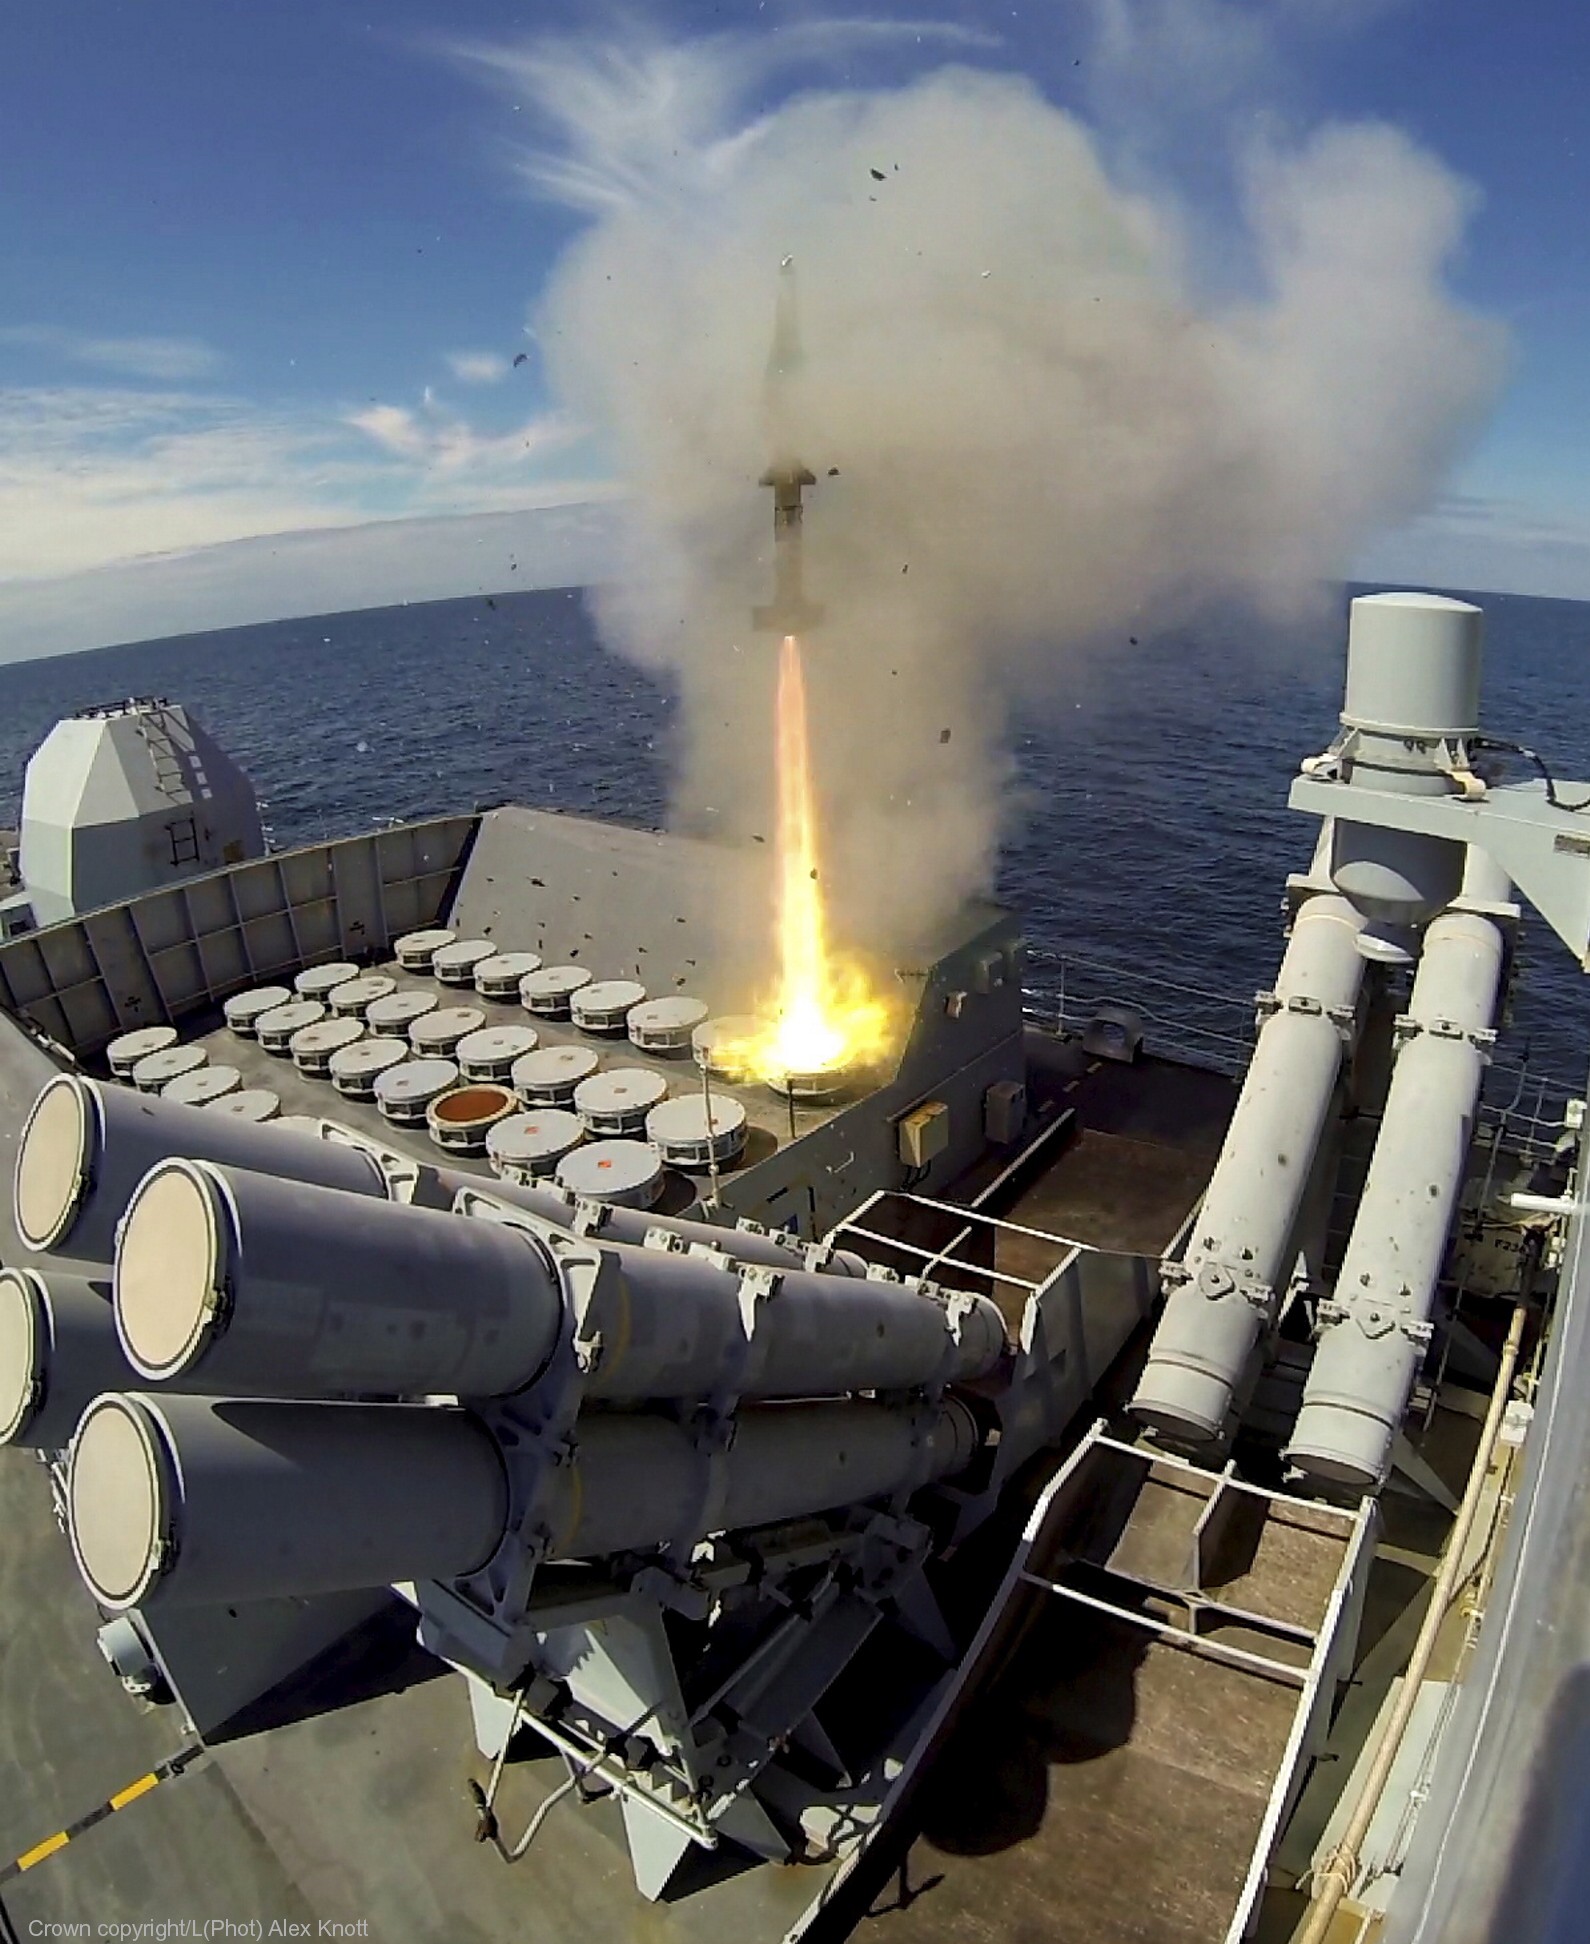 sea wolf sam missile gws-26 guided weapon system vertical launch type 23 duke class frigate royal navy 10